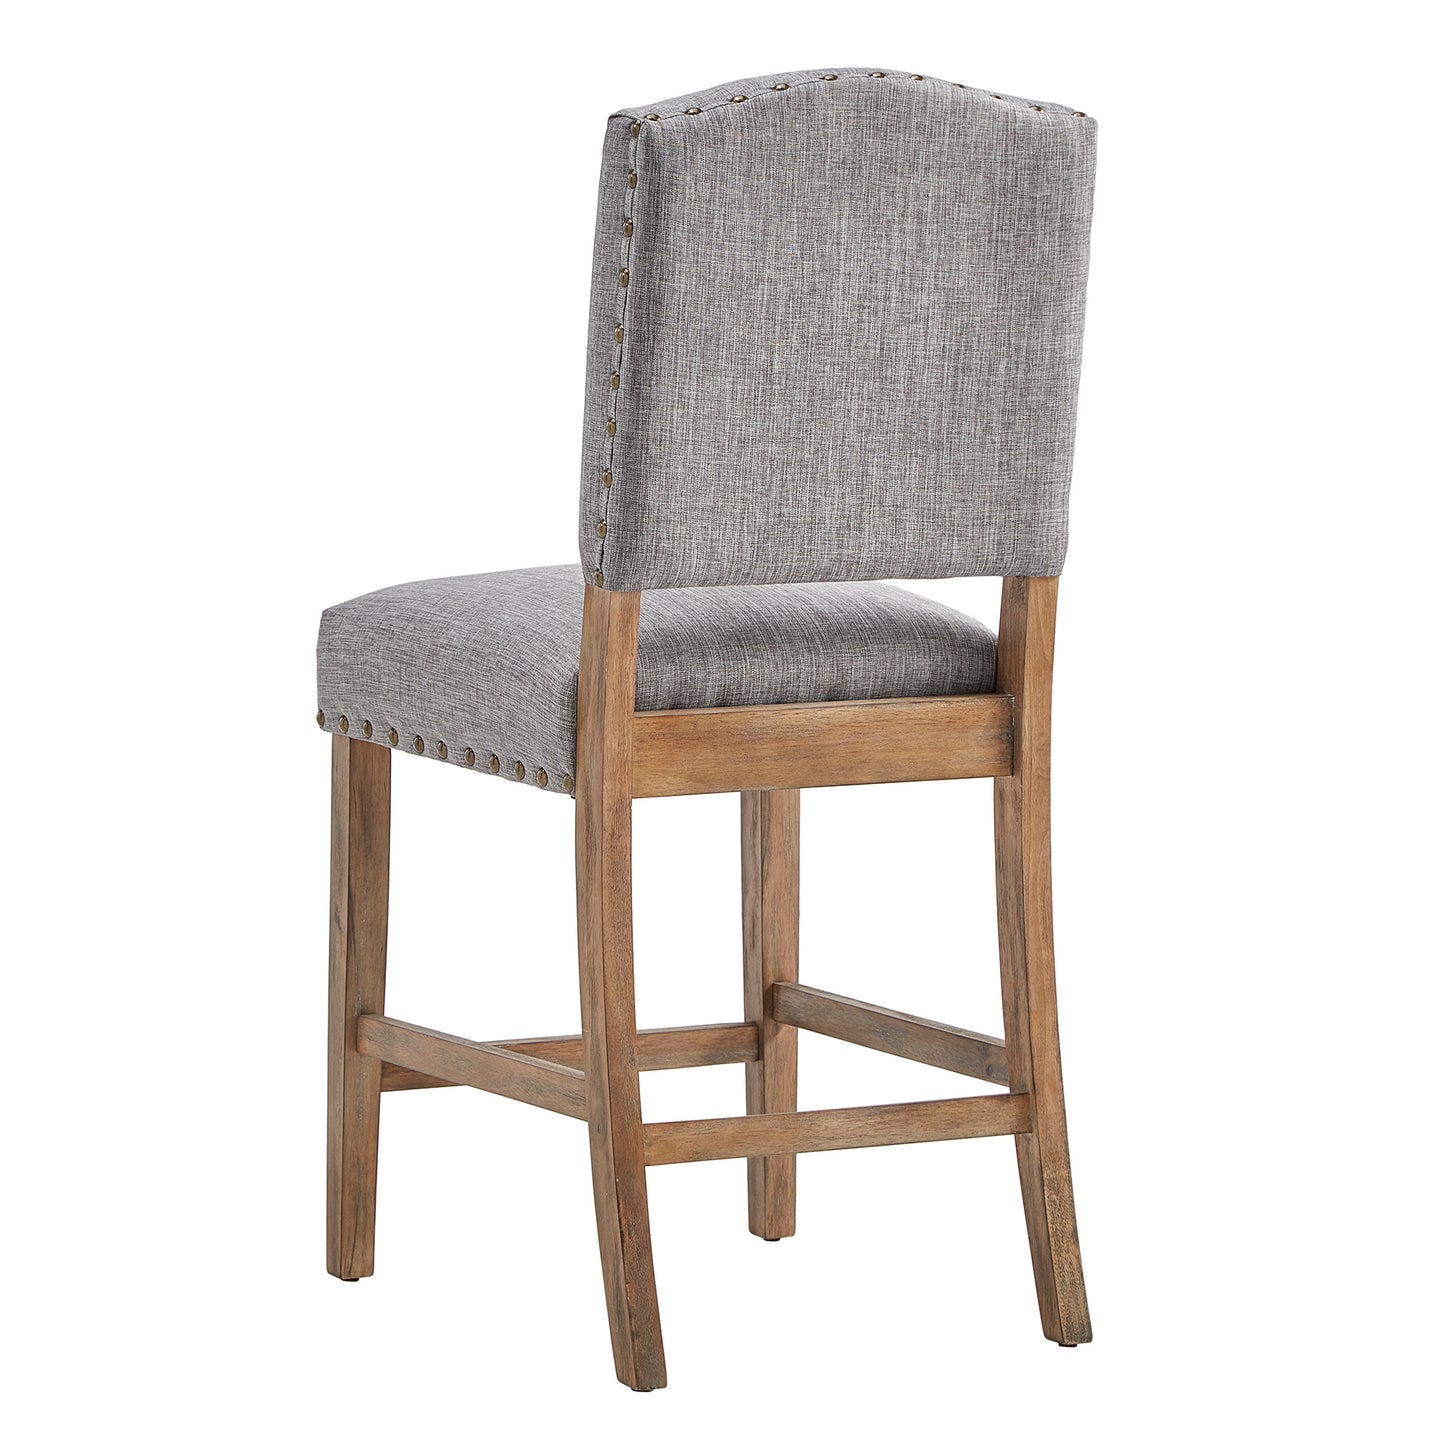 Premium Nailhead Upholstered Counter Height Chairs (Set of 2) - Grey Linen